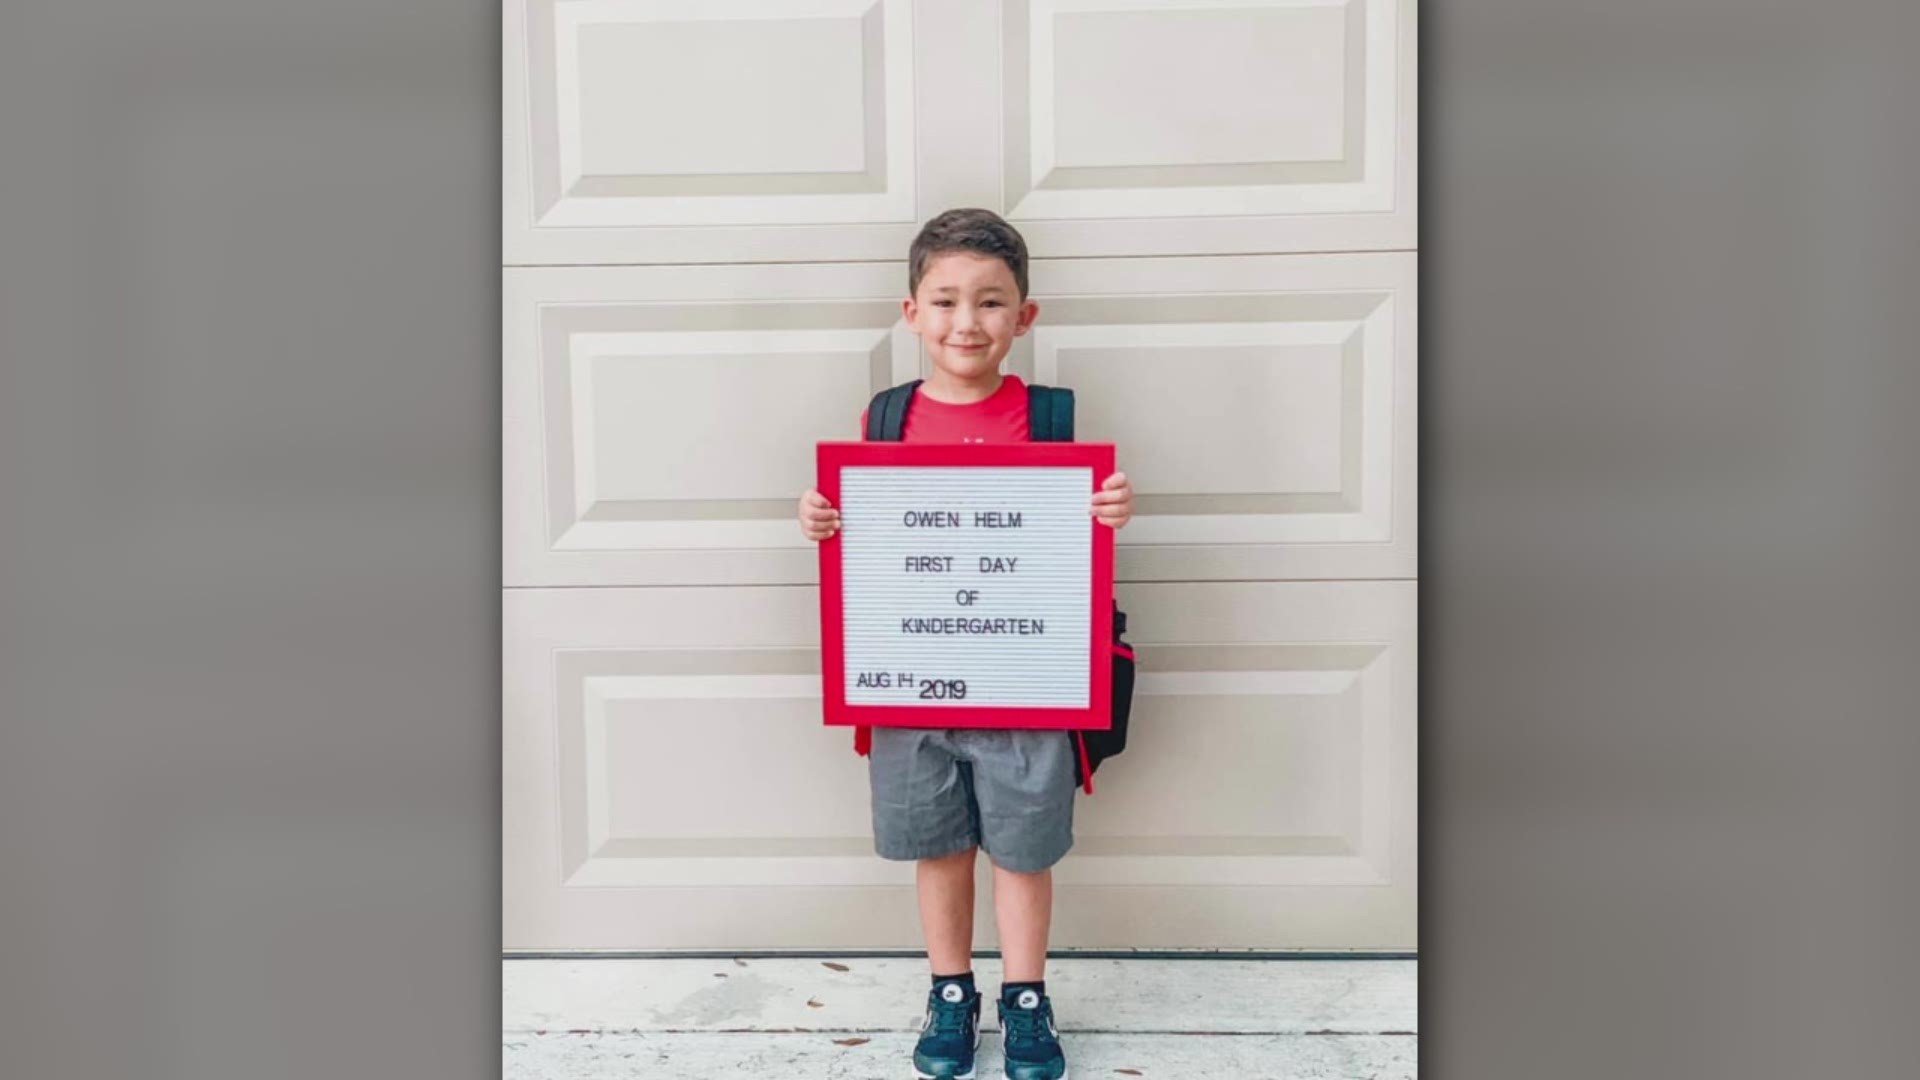 Lots of Southeast Texas kids started school Wednesday. We asked to see you first day photos, and we got lots of pictures of cute boys and girls!